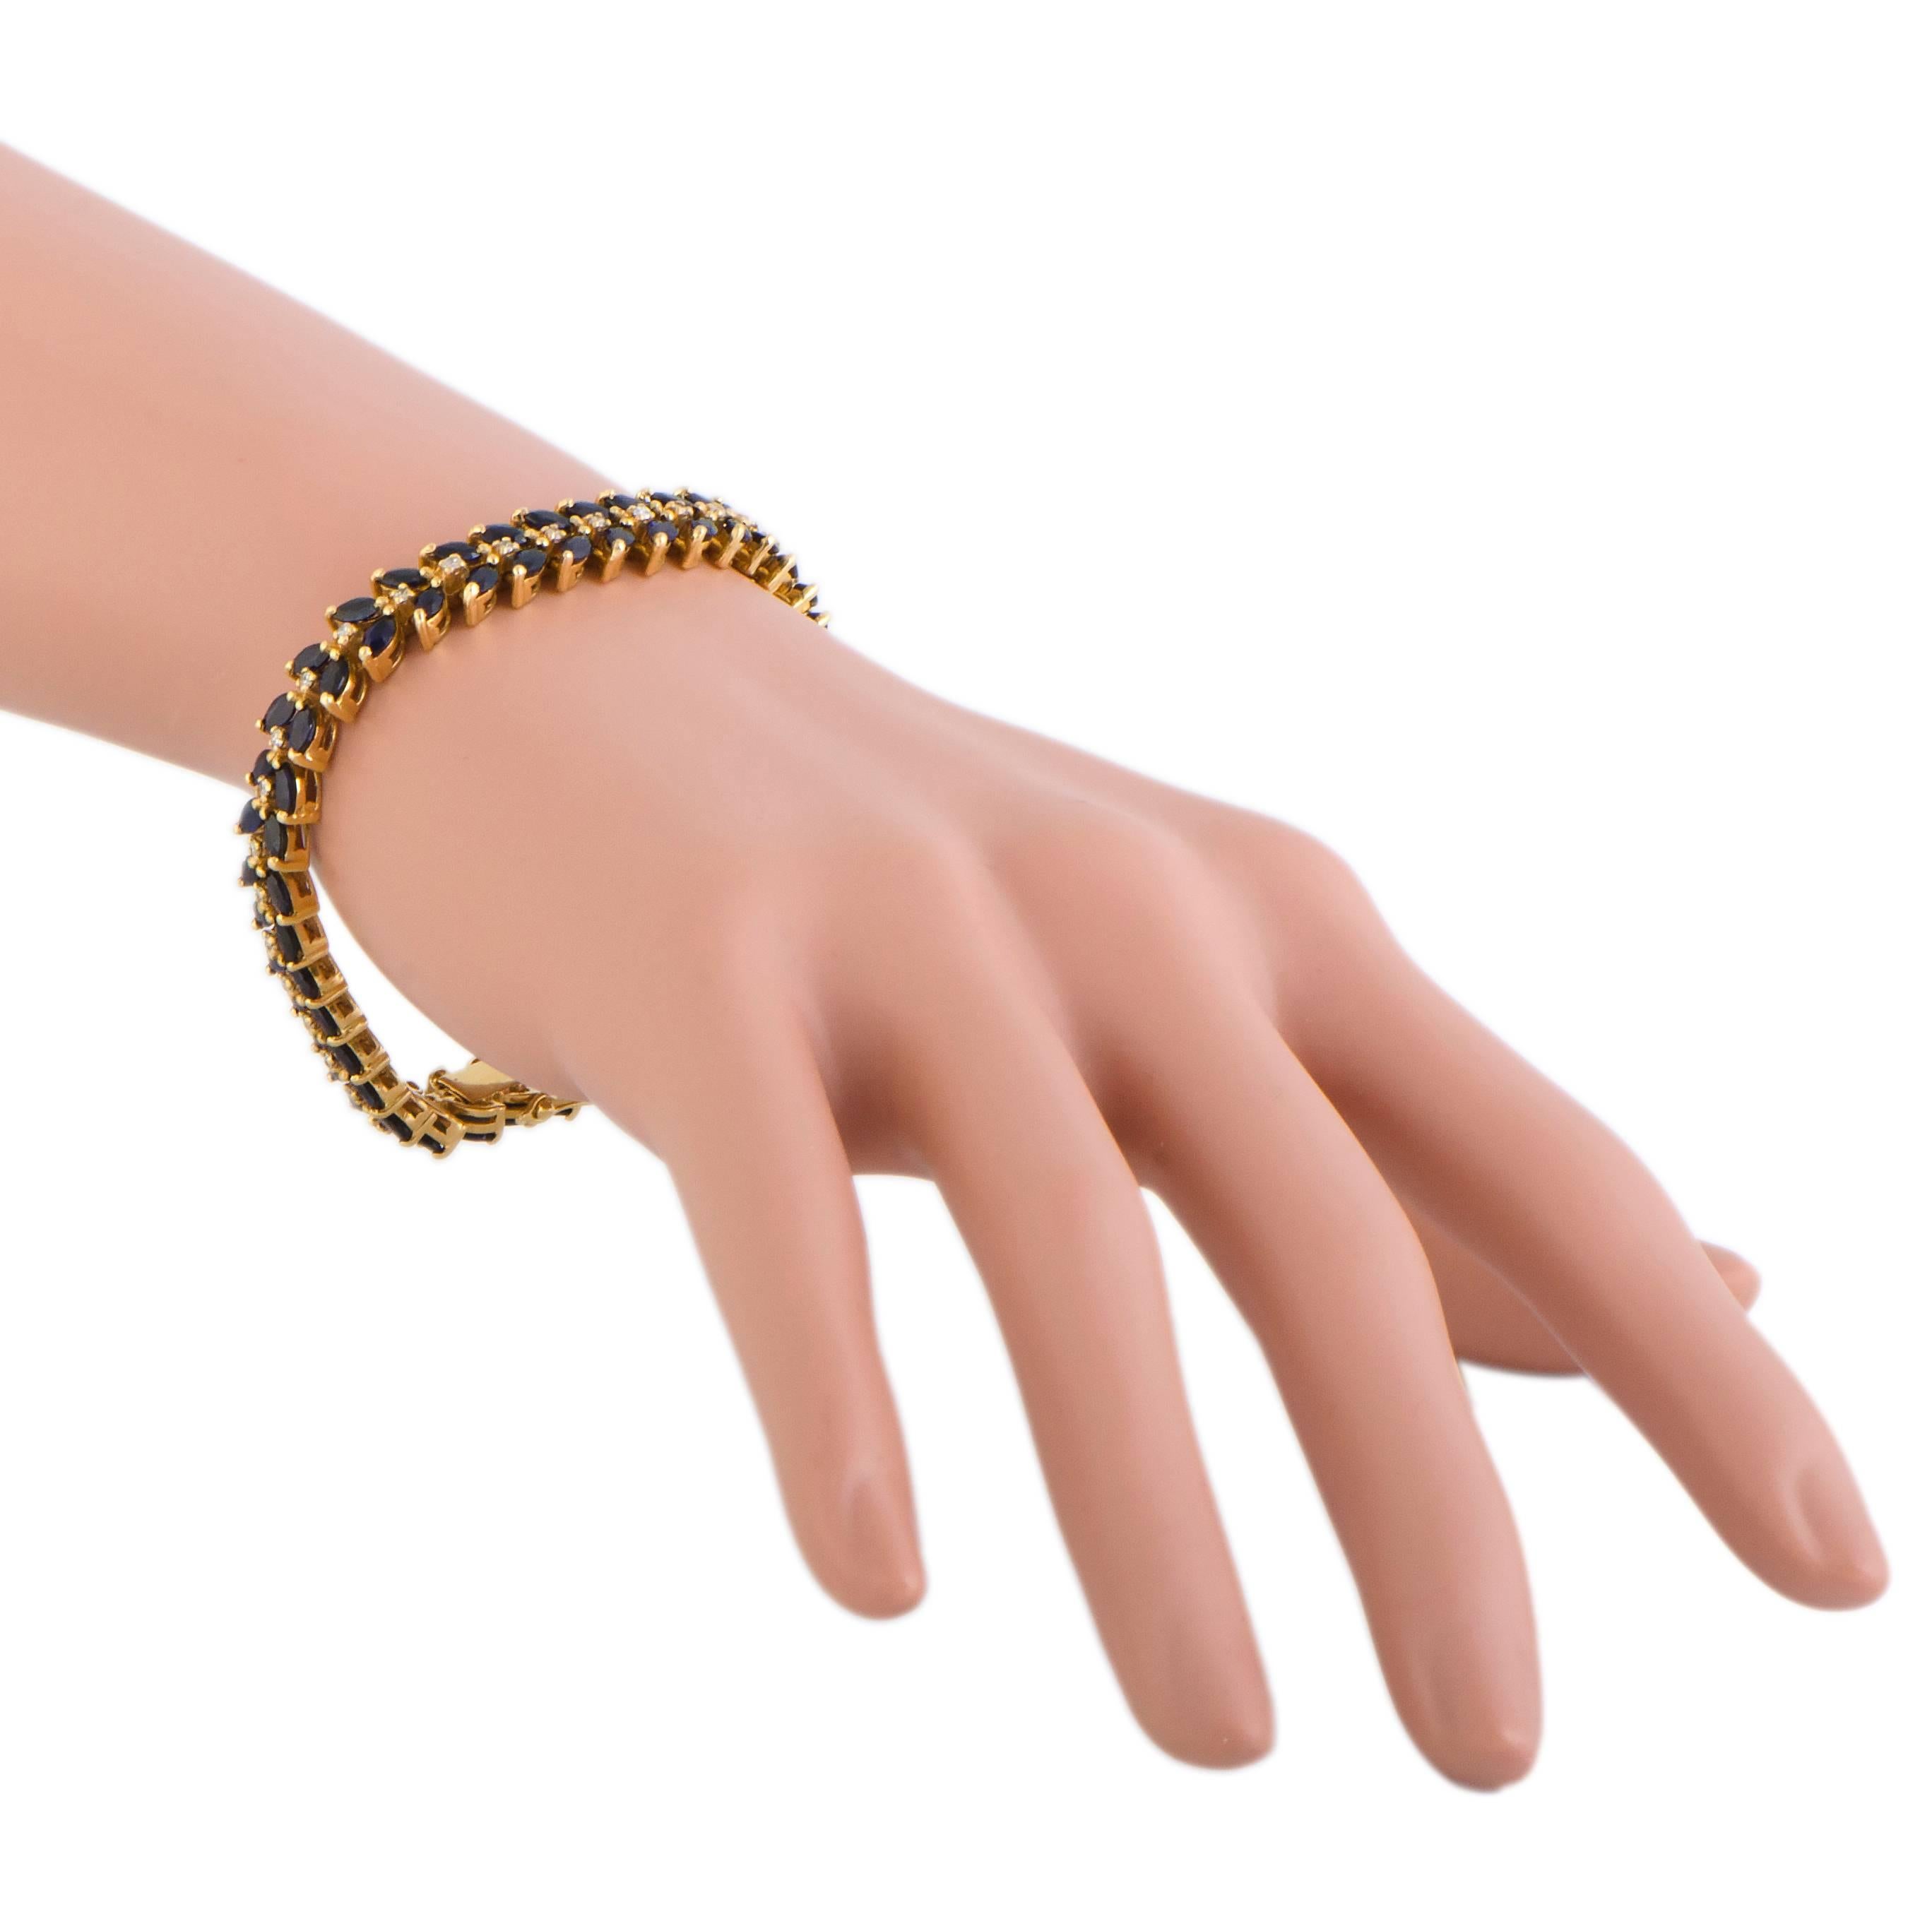 Combining an incredibly sophisticated design and exceptional craftsmanship quality, this splendid bracelet will accentuate your look in the most stylish manner. The bracelet is made of classy 18K yellow gold and set with 0.40 carats of glistening